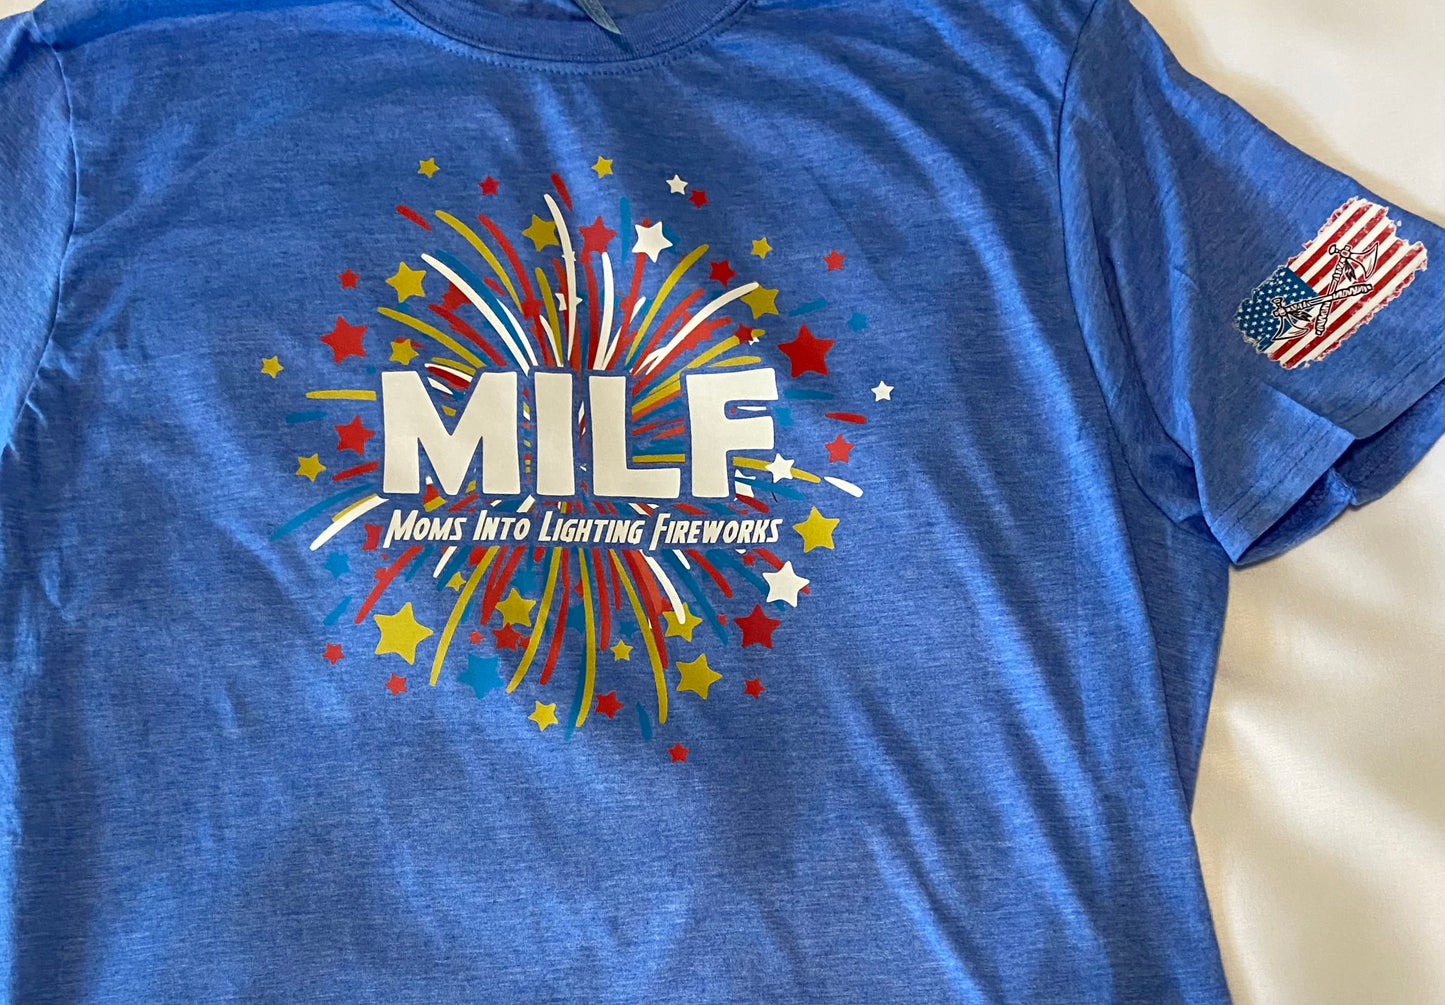 Funny Tee - MILF - Moms Into Lighting Fireworks - 4th of July Independence Day